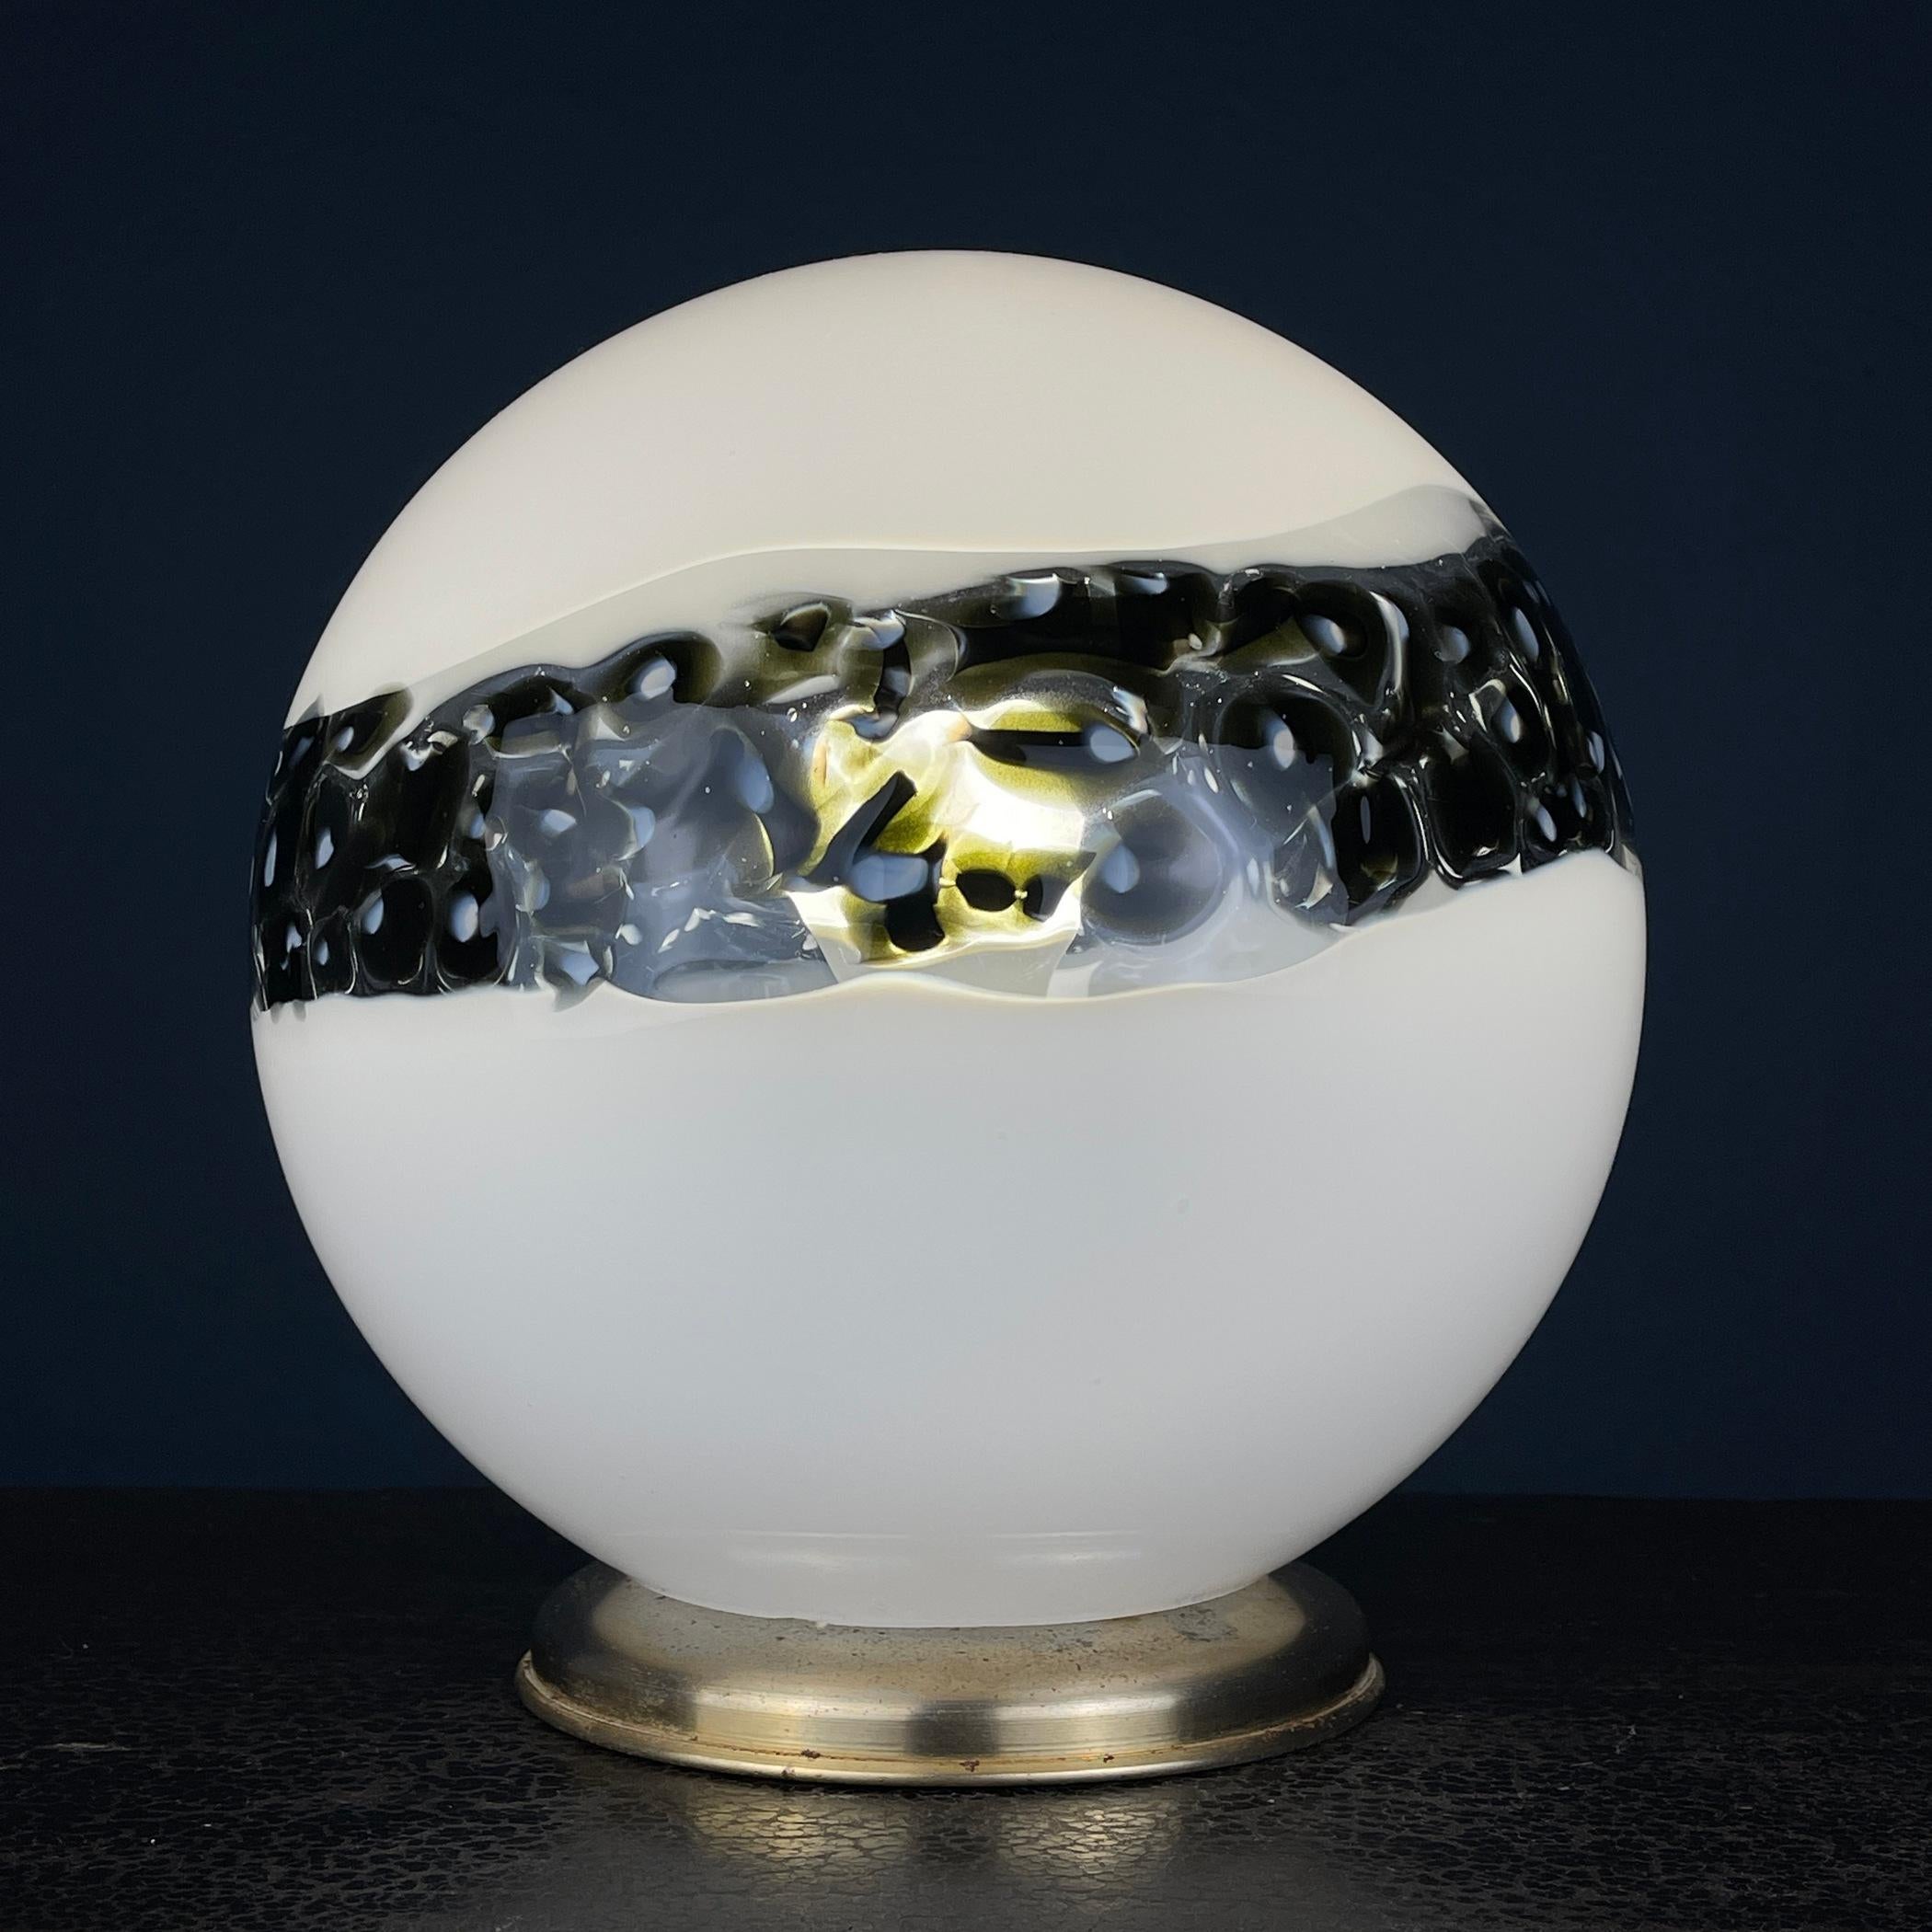 This is a splendid Murano glass table lamp from Italy, crafted in the 1970s during the Mid-century Modern era. The lamp boasts a unique and elegant design, featuring a spherical white Murano glass shade accented with a striking black stripe.

The